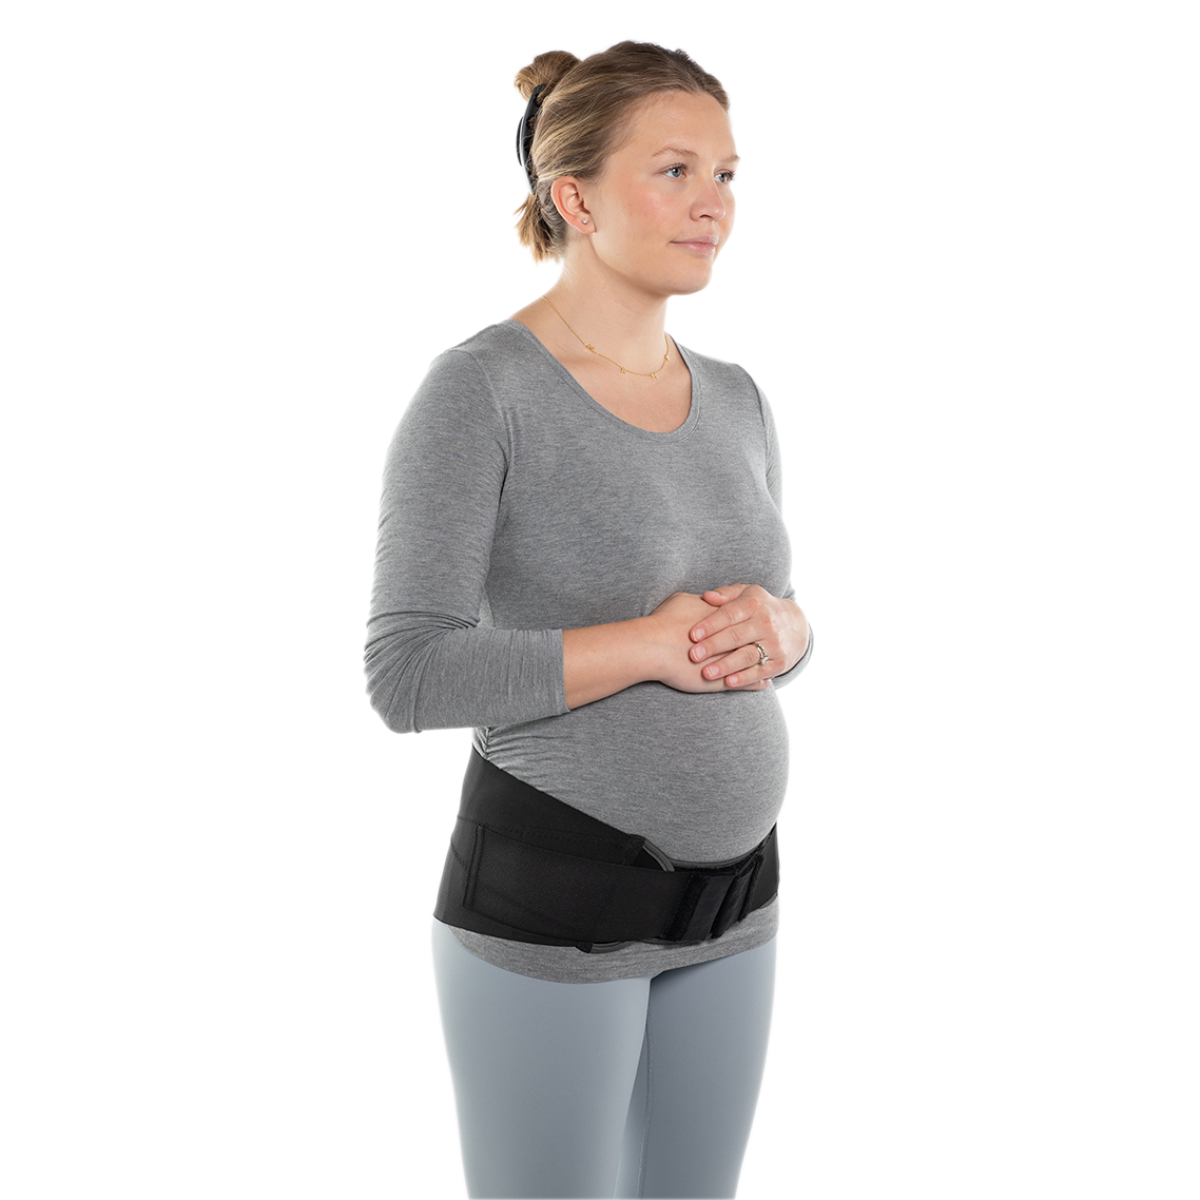 Maternity Support Belt by Diane Lee: Low Back & Pelvic Girdle Pain Solution